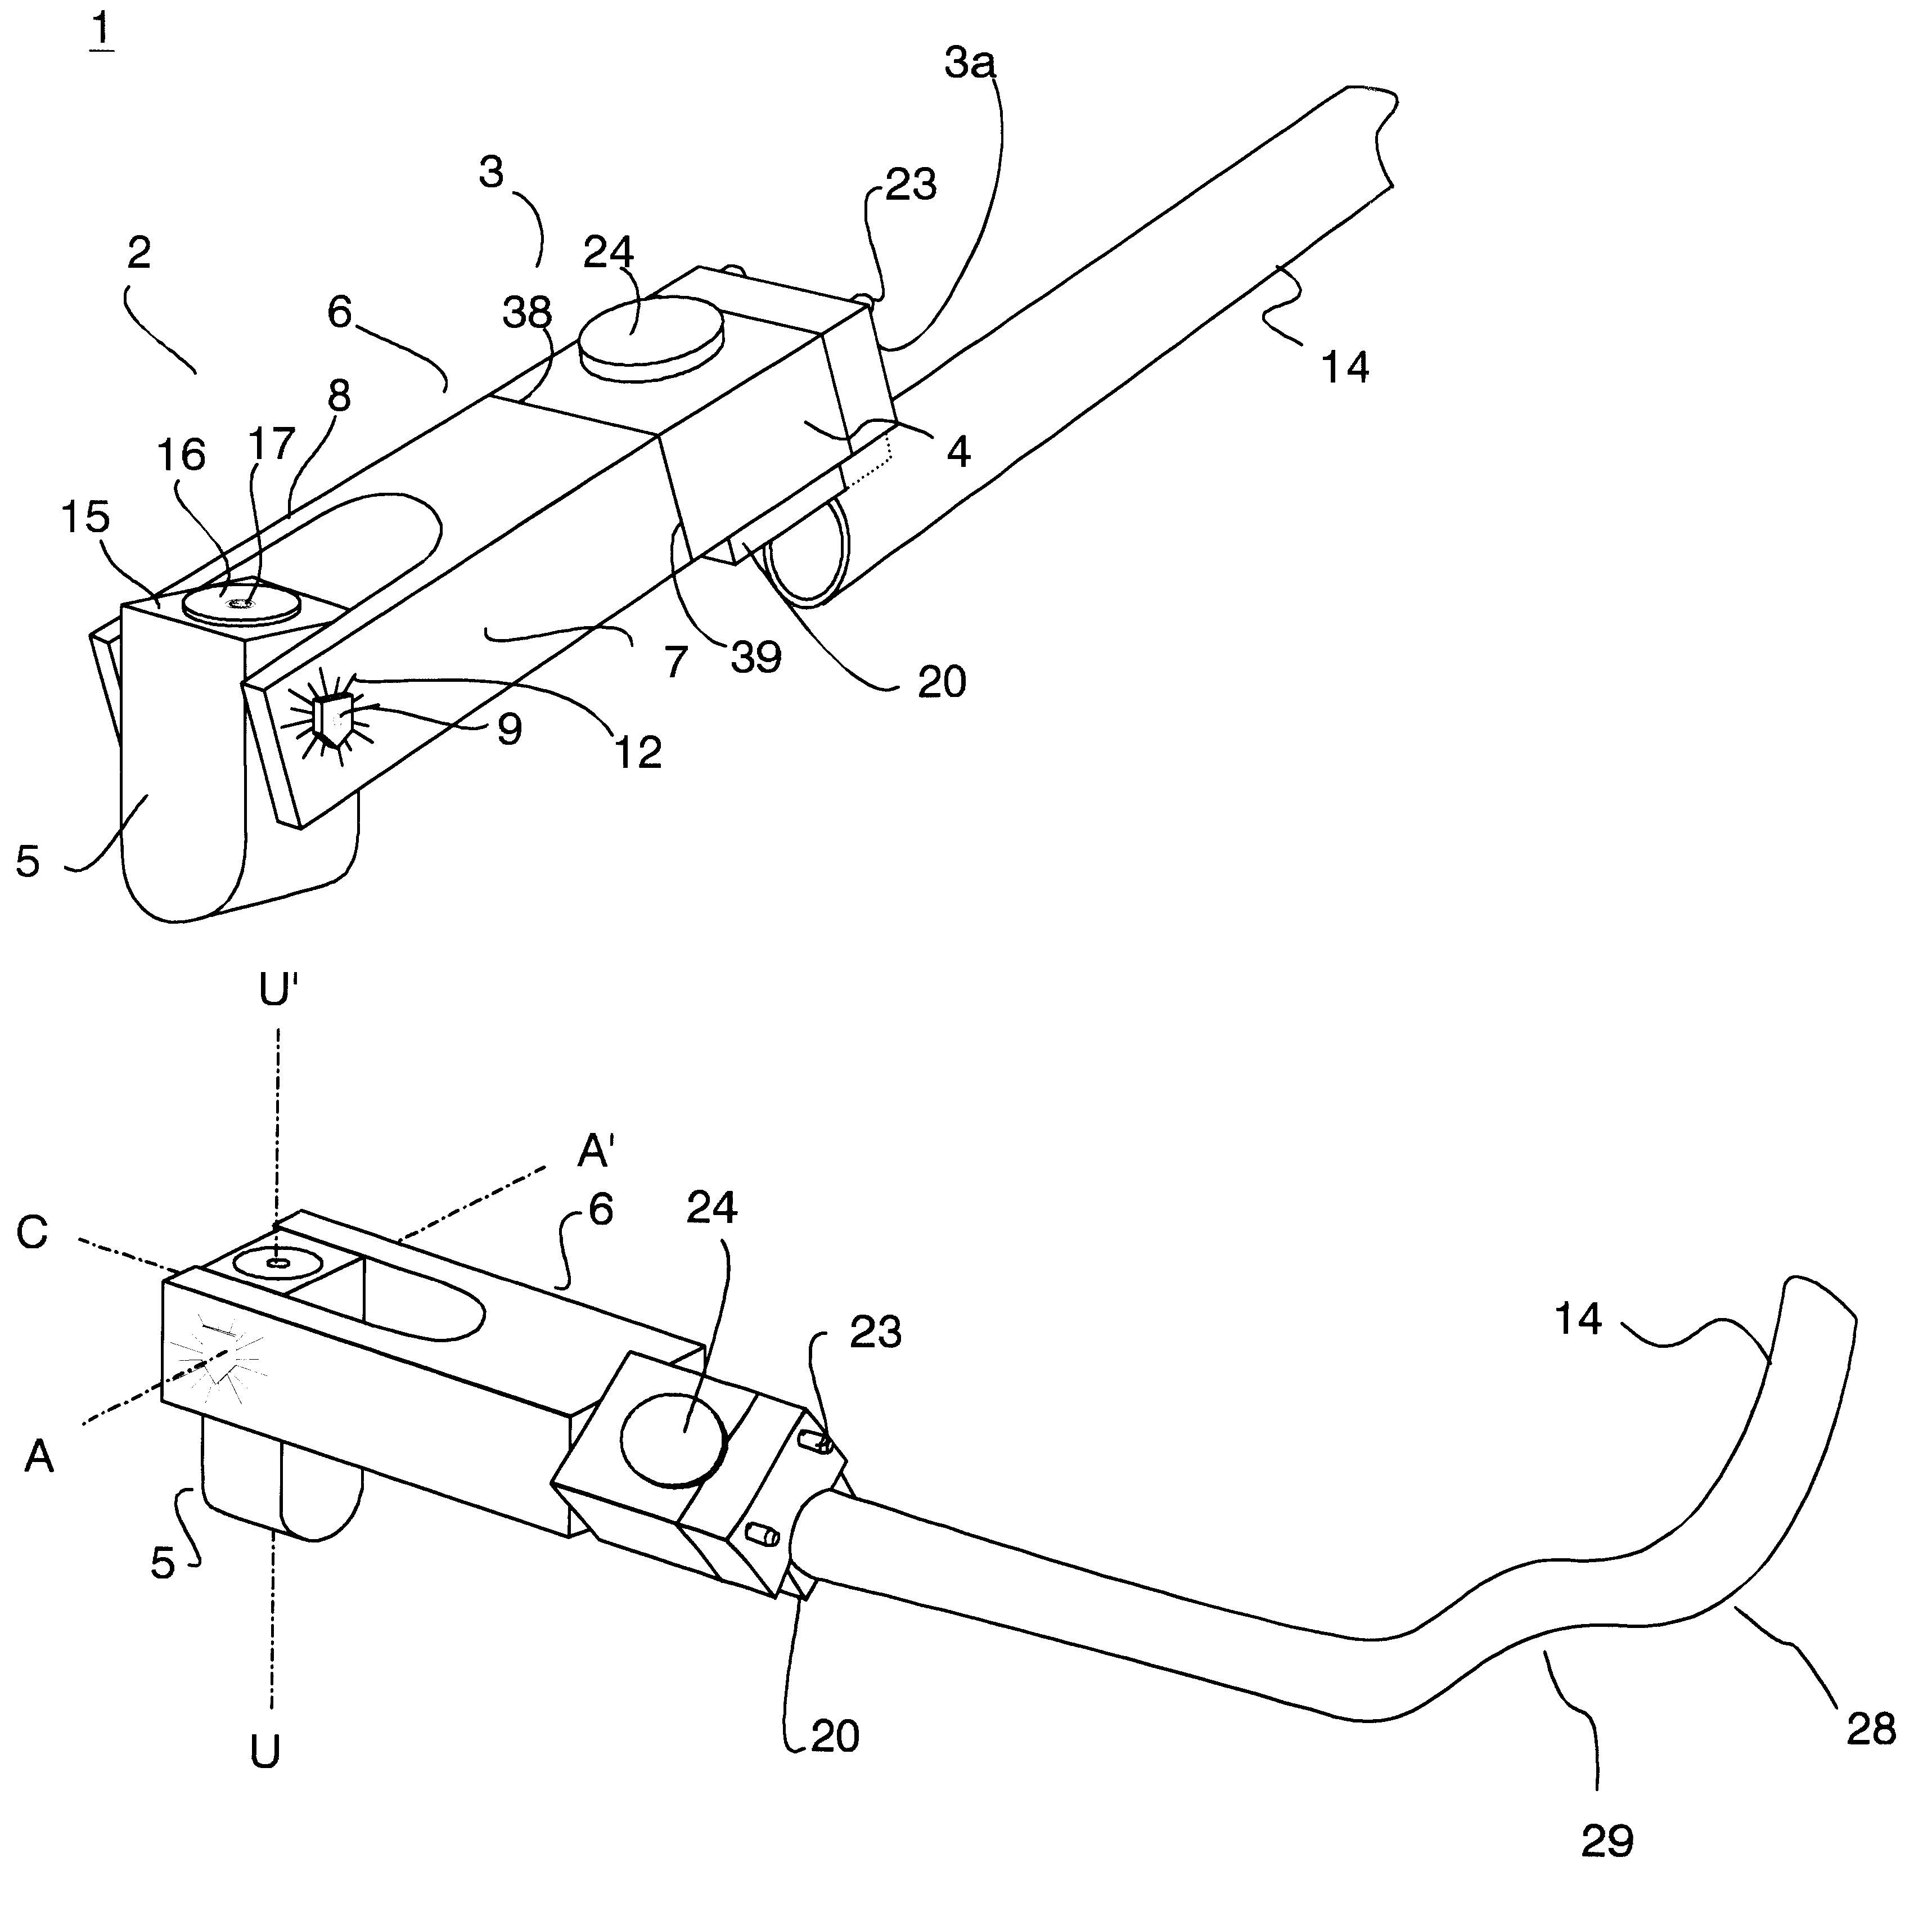 Pipe-bending alignment device